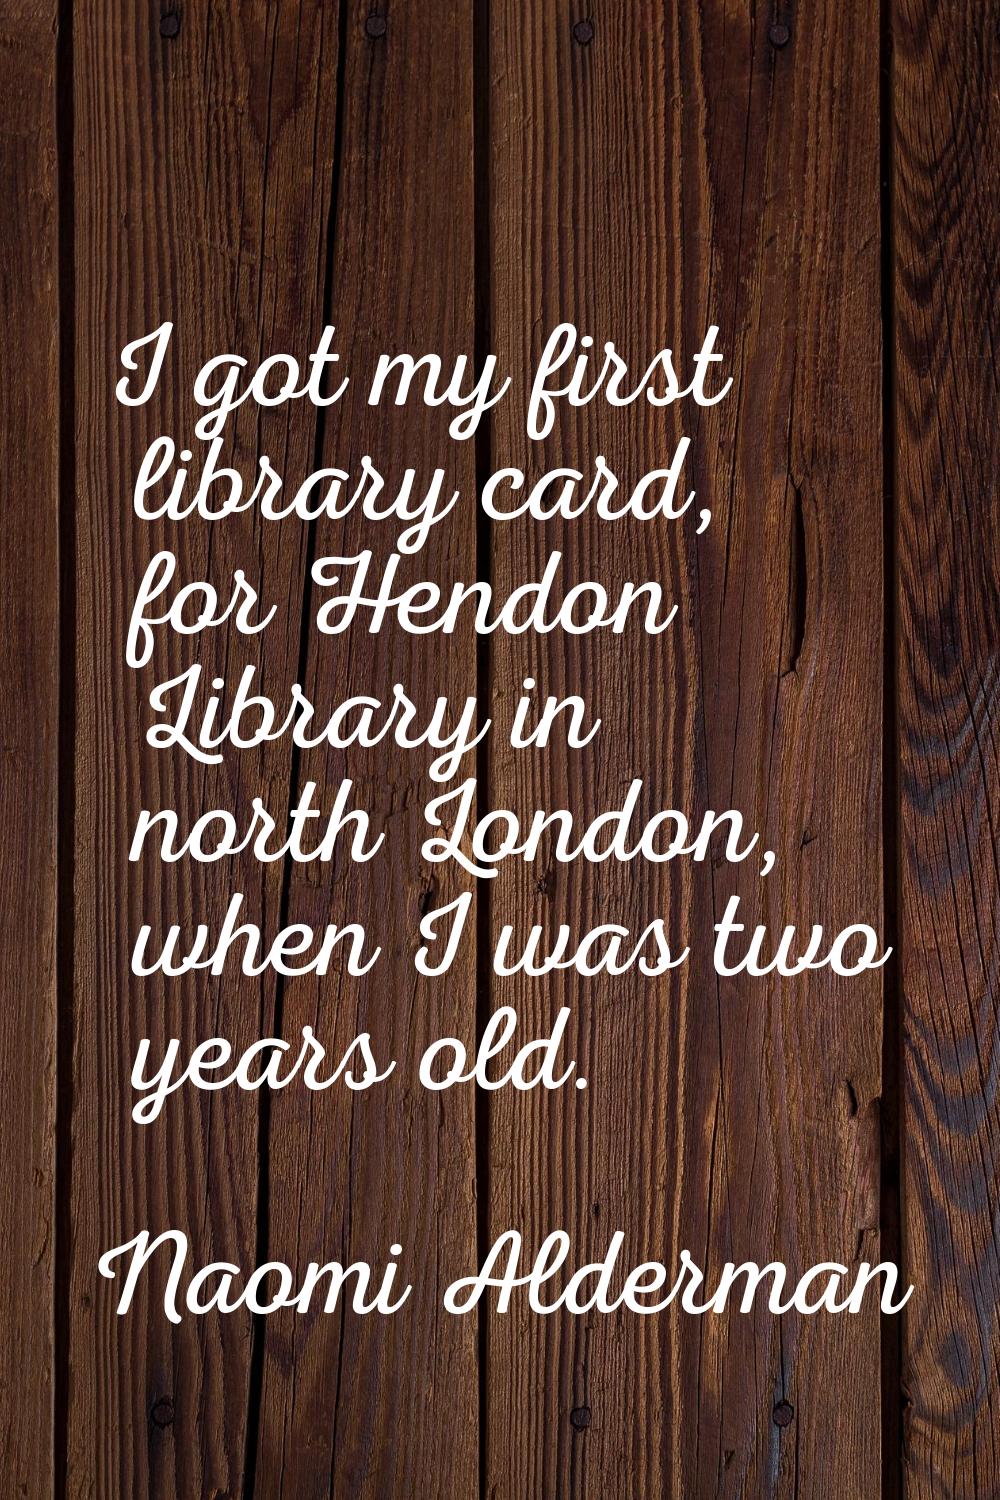 I got my first library card, for Hendon Library in north London, when I was two years old.